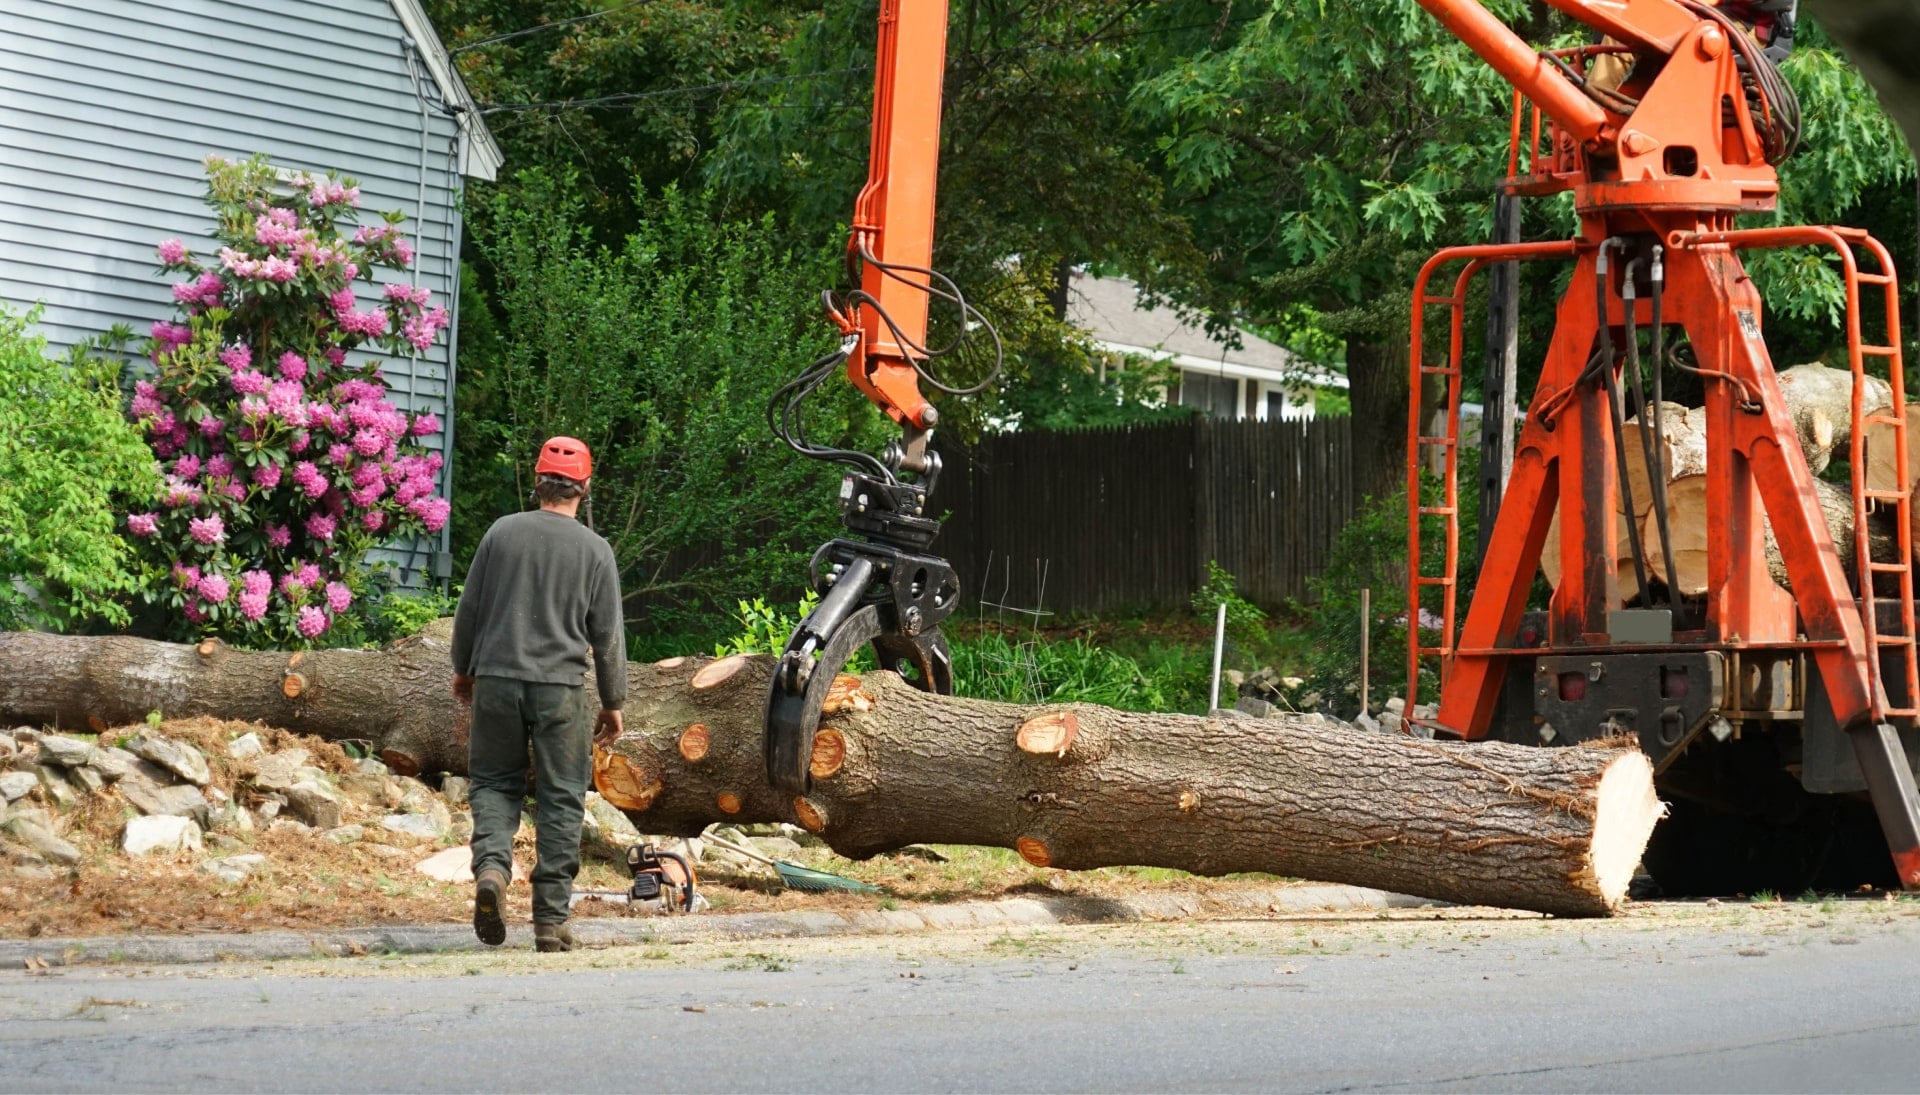 Local partner for Tree removal services in Pensacola